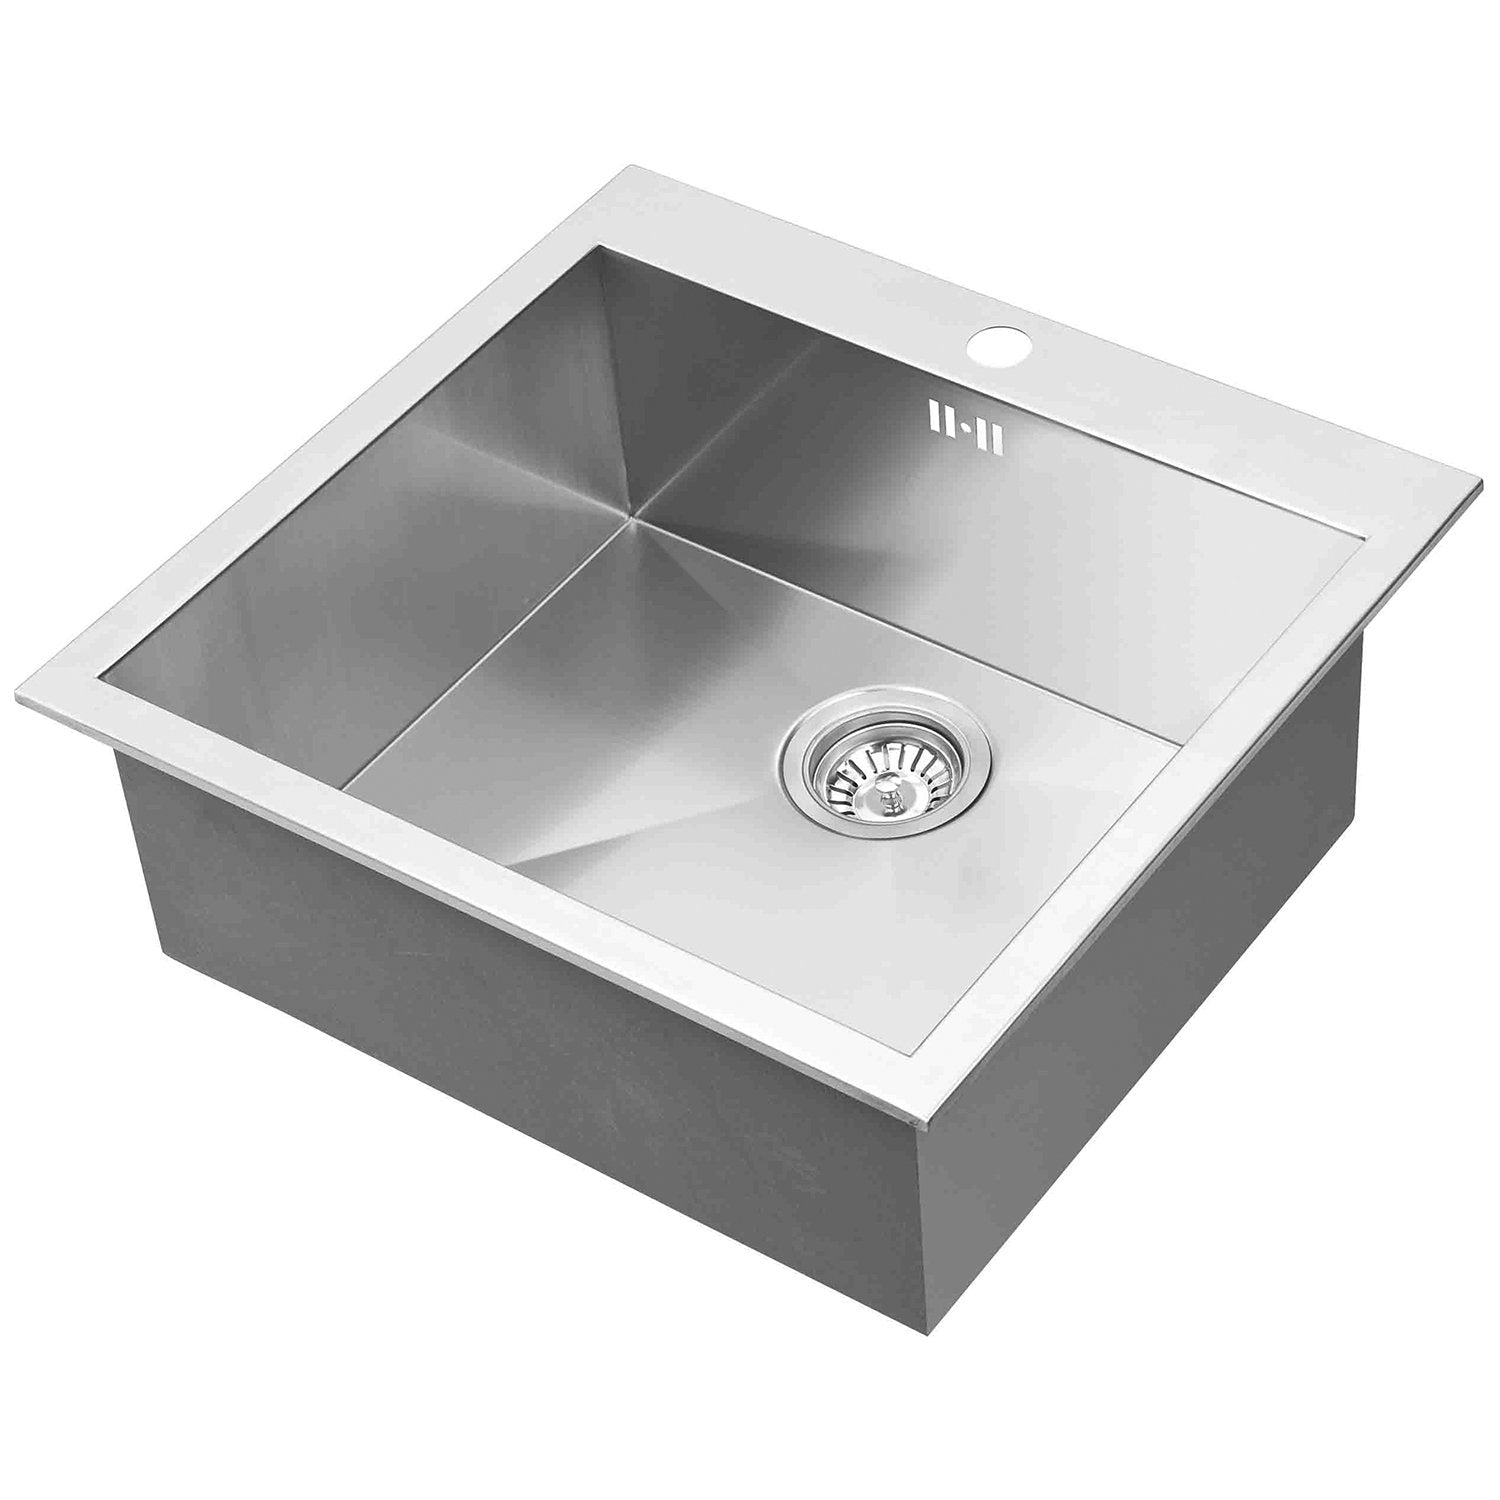 DAX Handmade Single Bowl Top Mount Kitchen Sink, 18 Gauge Stainless Steel, Brushed Finish, 21 x 20 x 8 Inches (DAX-AT54S)